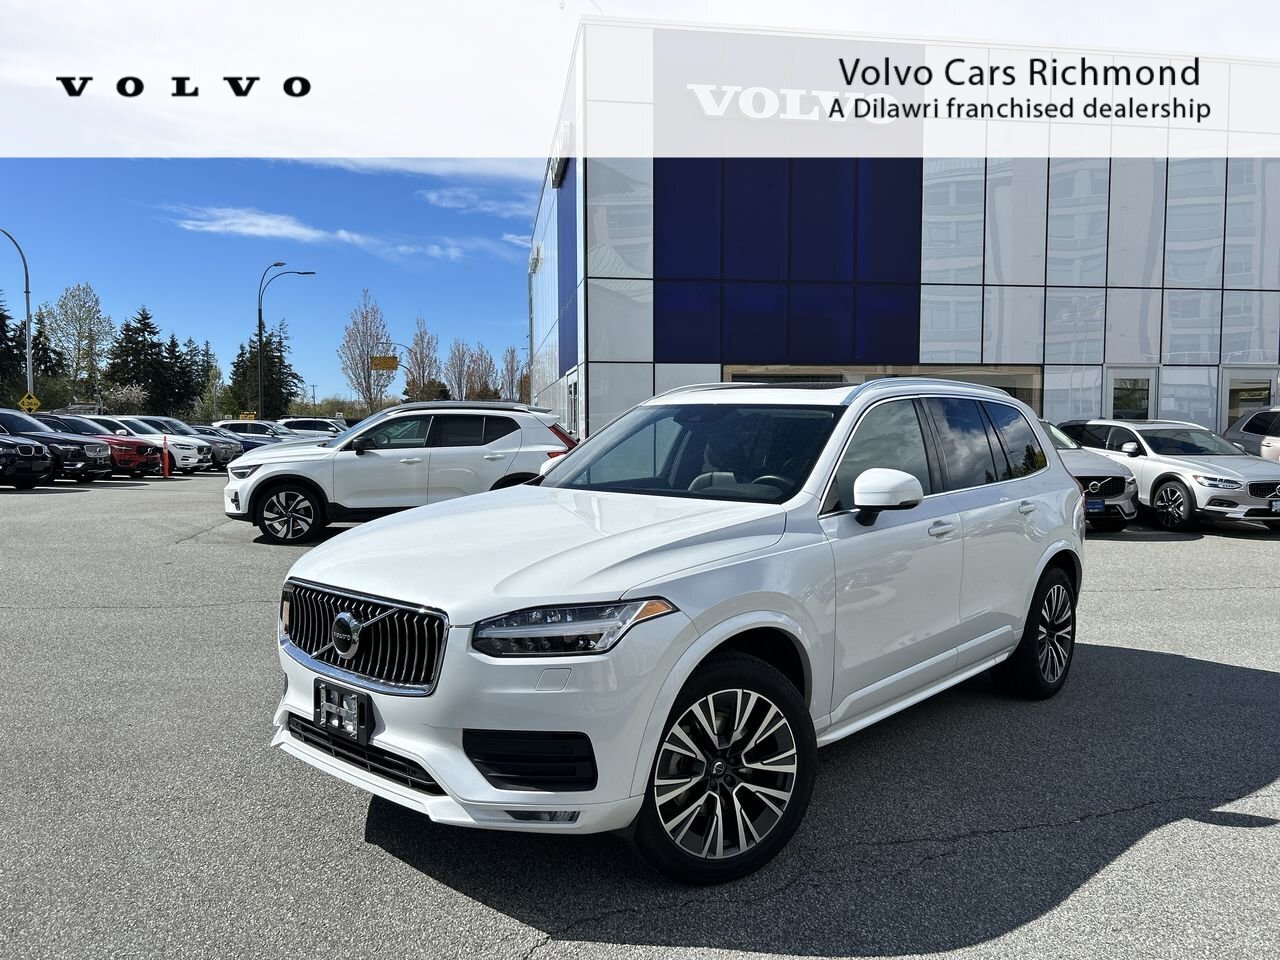 2021 Volvo XC90 T6 AWD Momentum (7-Seat) | Finance from 3.99% OAC 